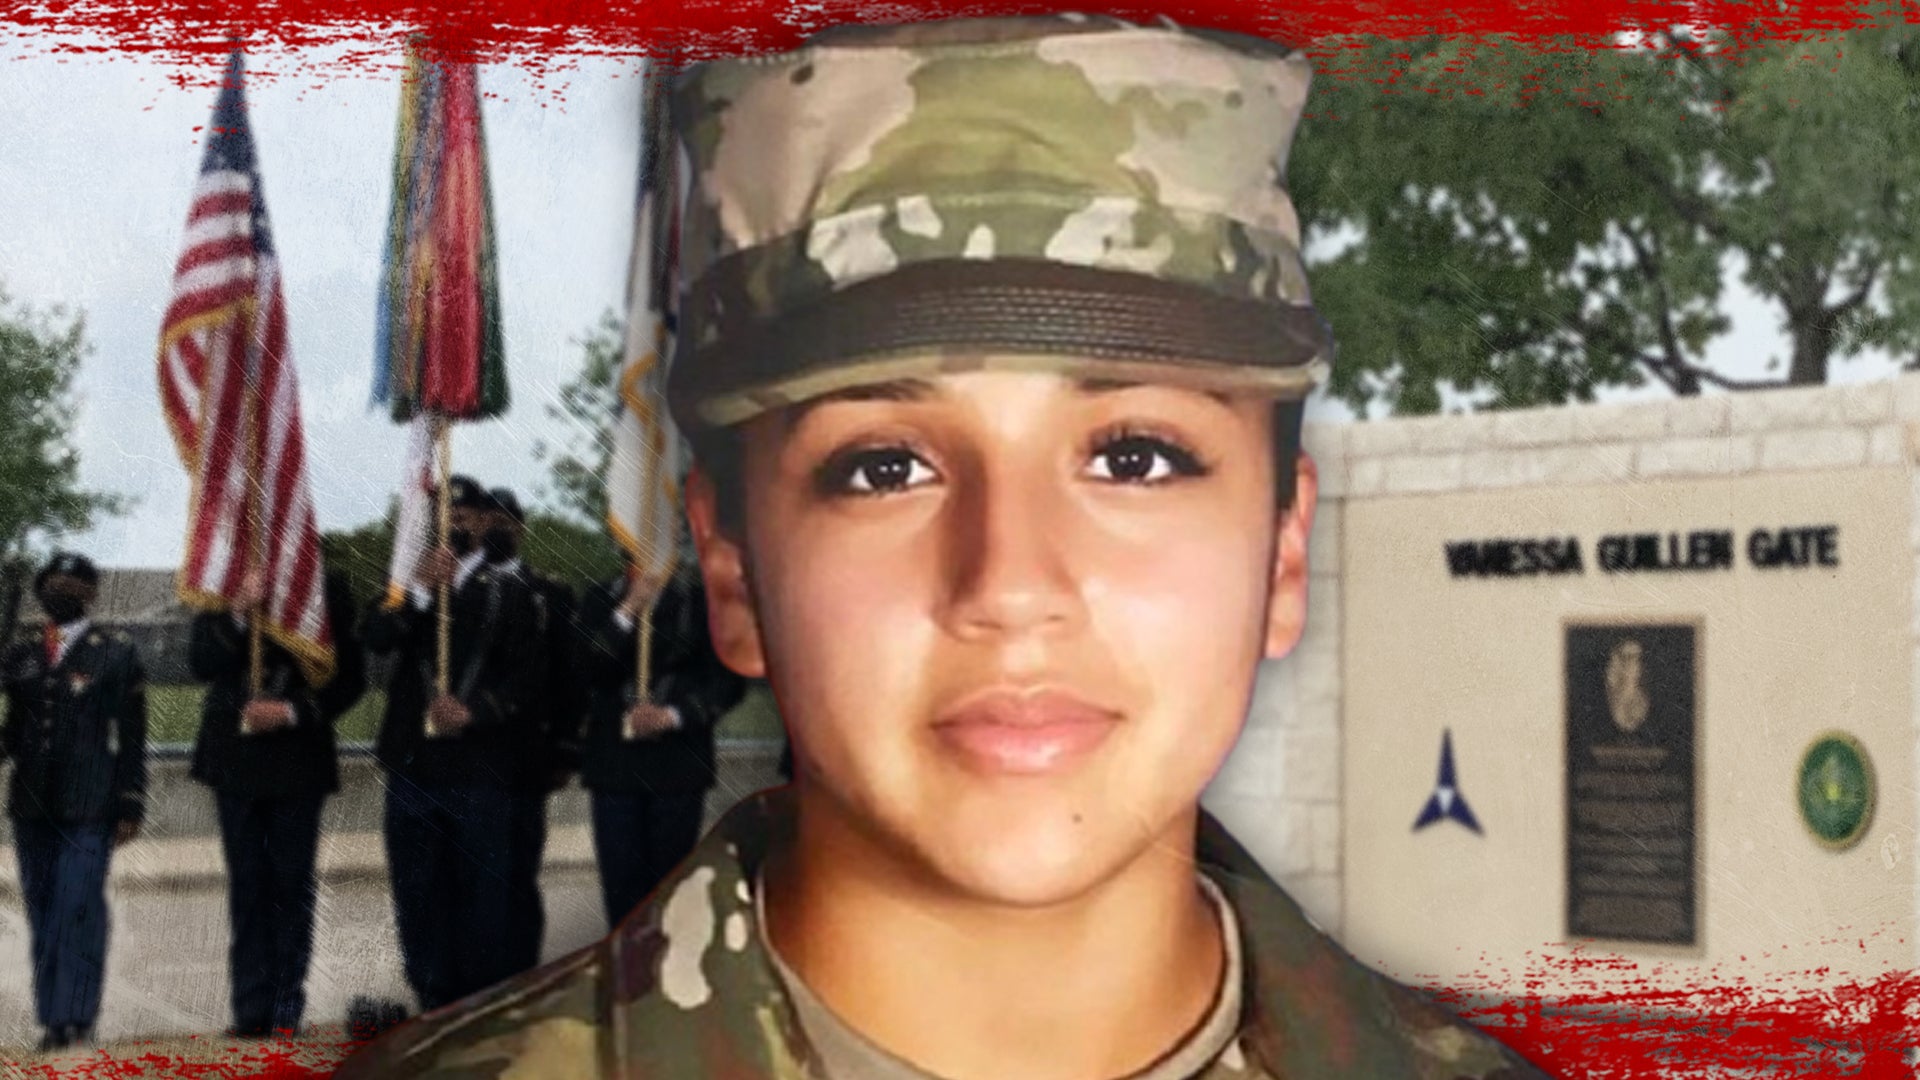 The Army vowed change after Vanessa Guillén’s murder. One year later, it’s just getting started